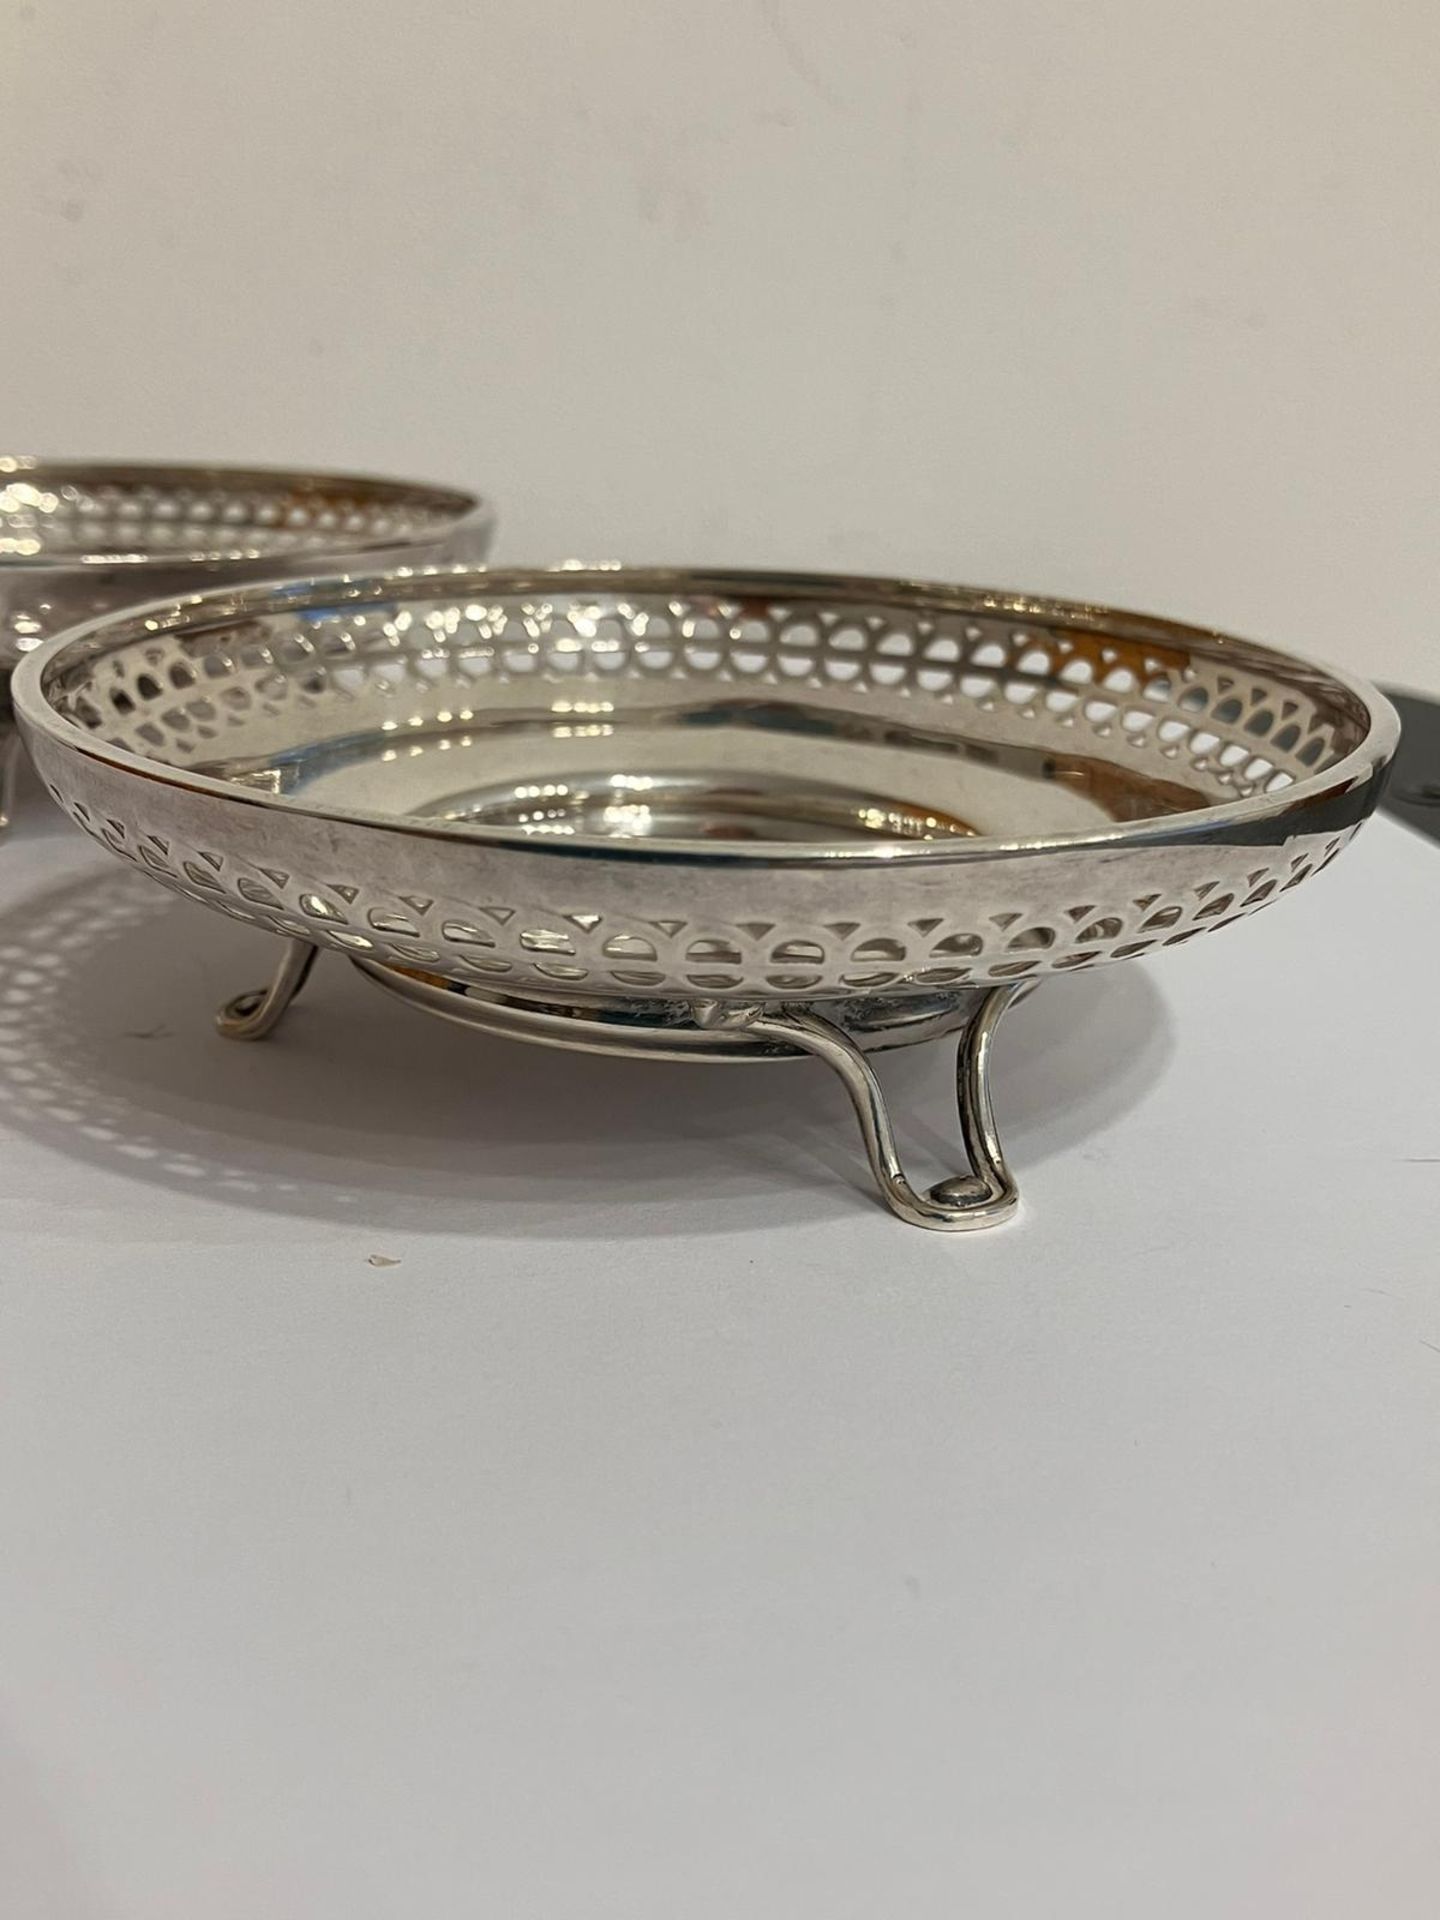 Antique SILVER Pair of BON BON DISHES. Hallmark for A and J Zimmerman, Birmingham 1925. Lovely art - Image 2 of 9